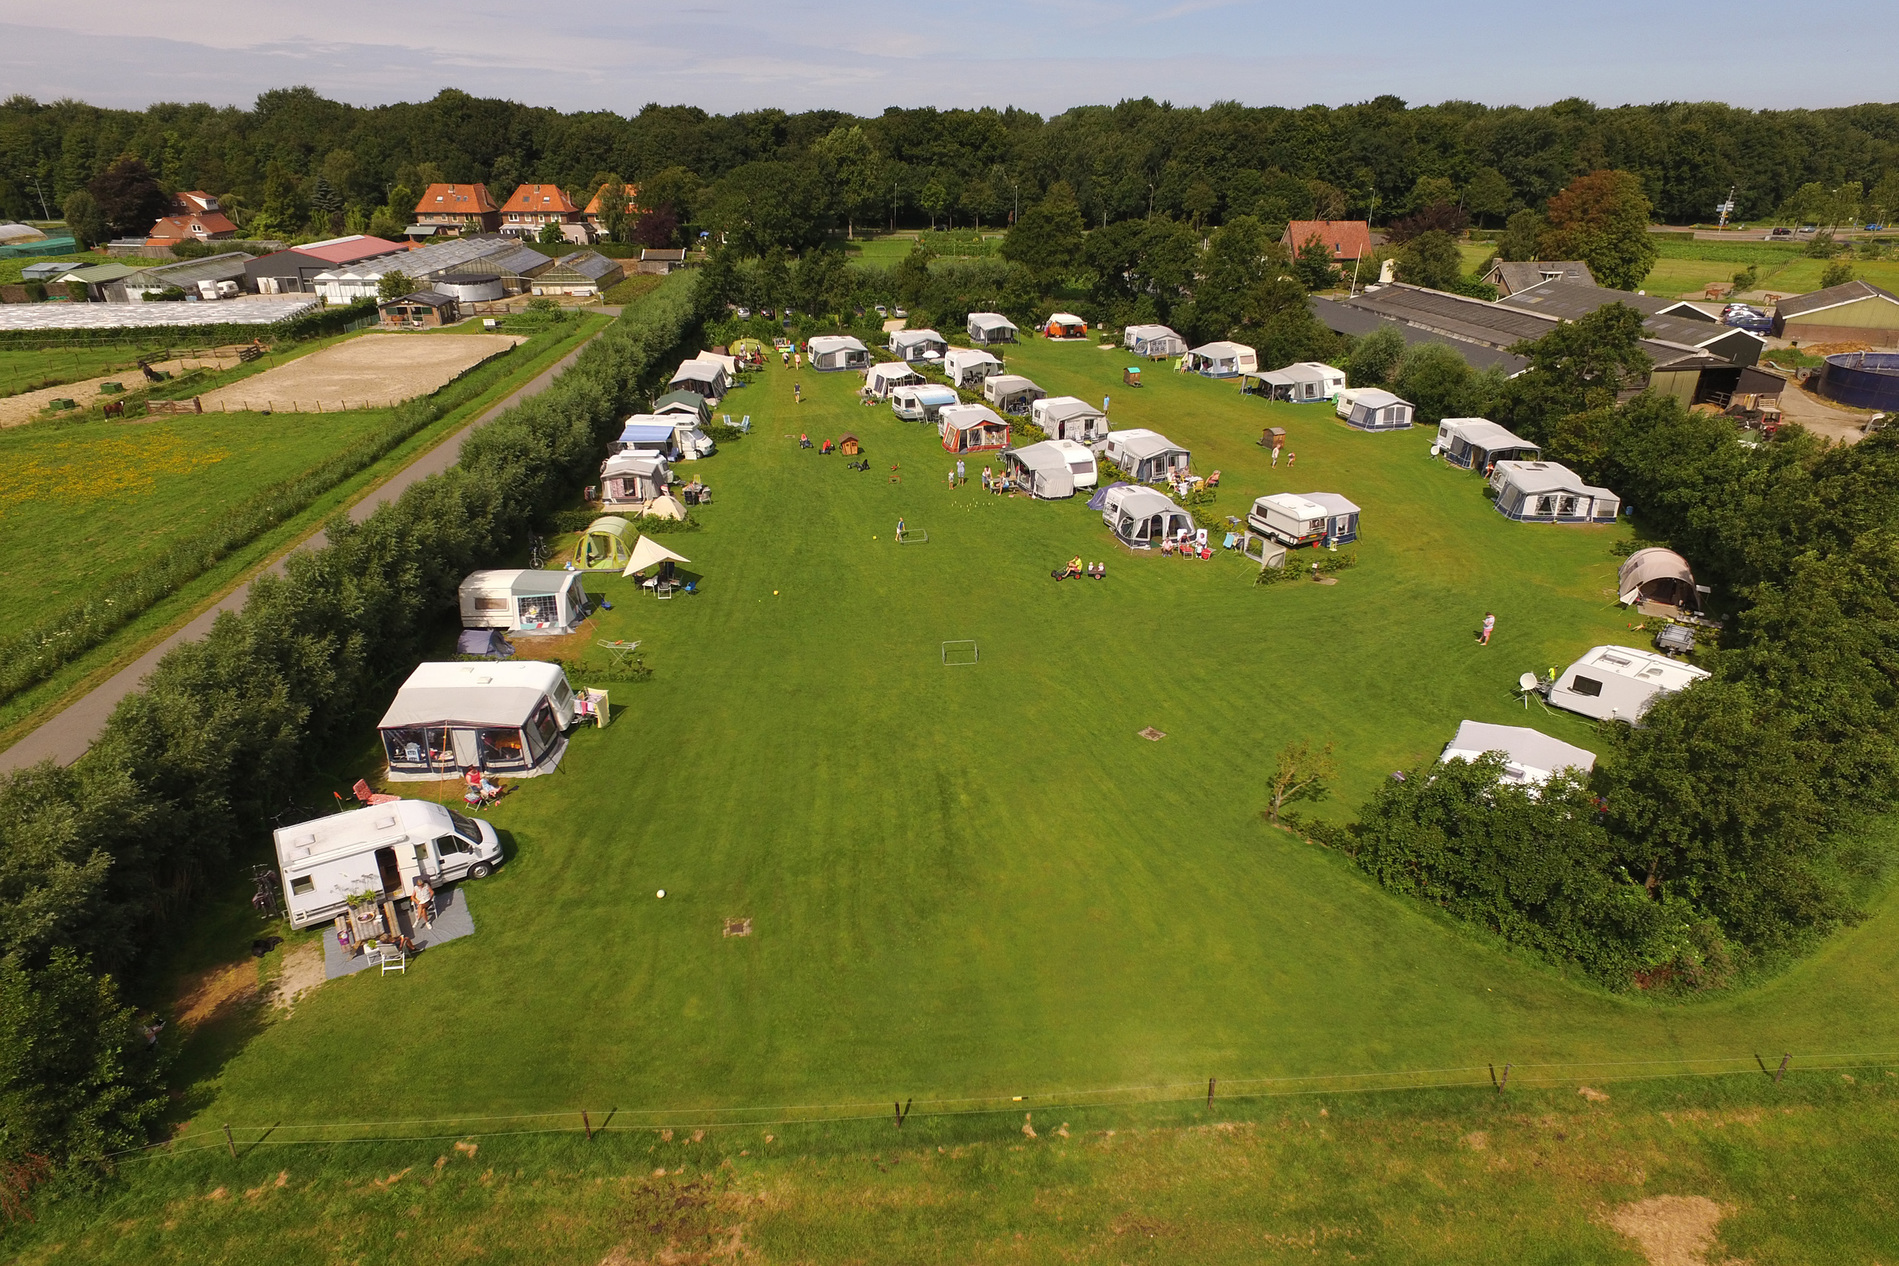 Agro-camping Ormsby Field